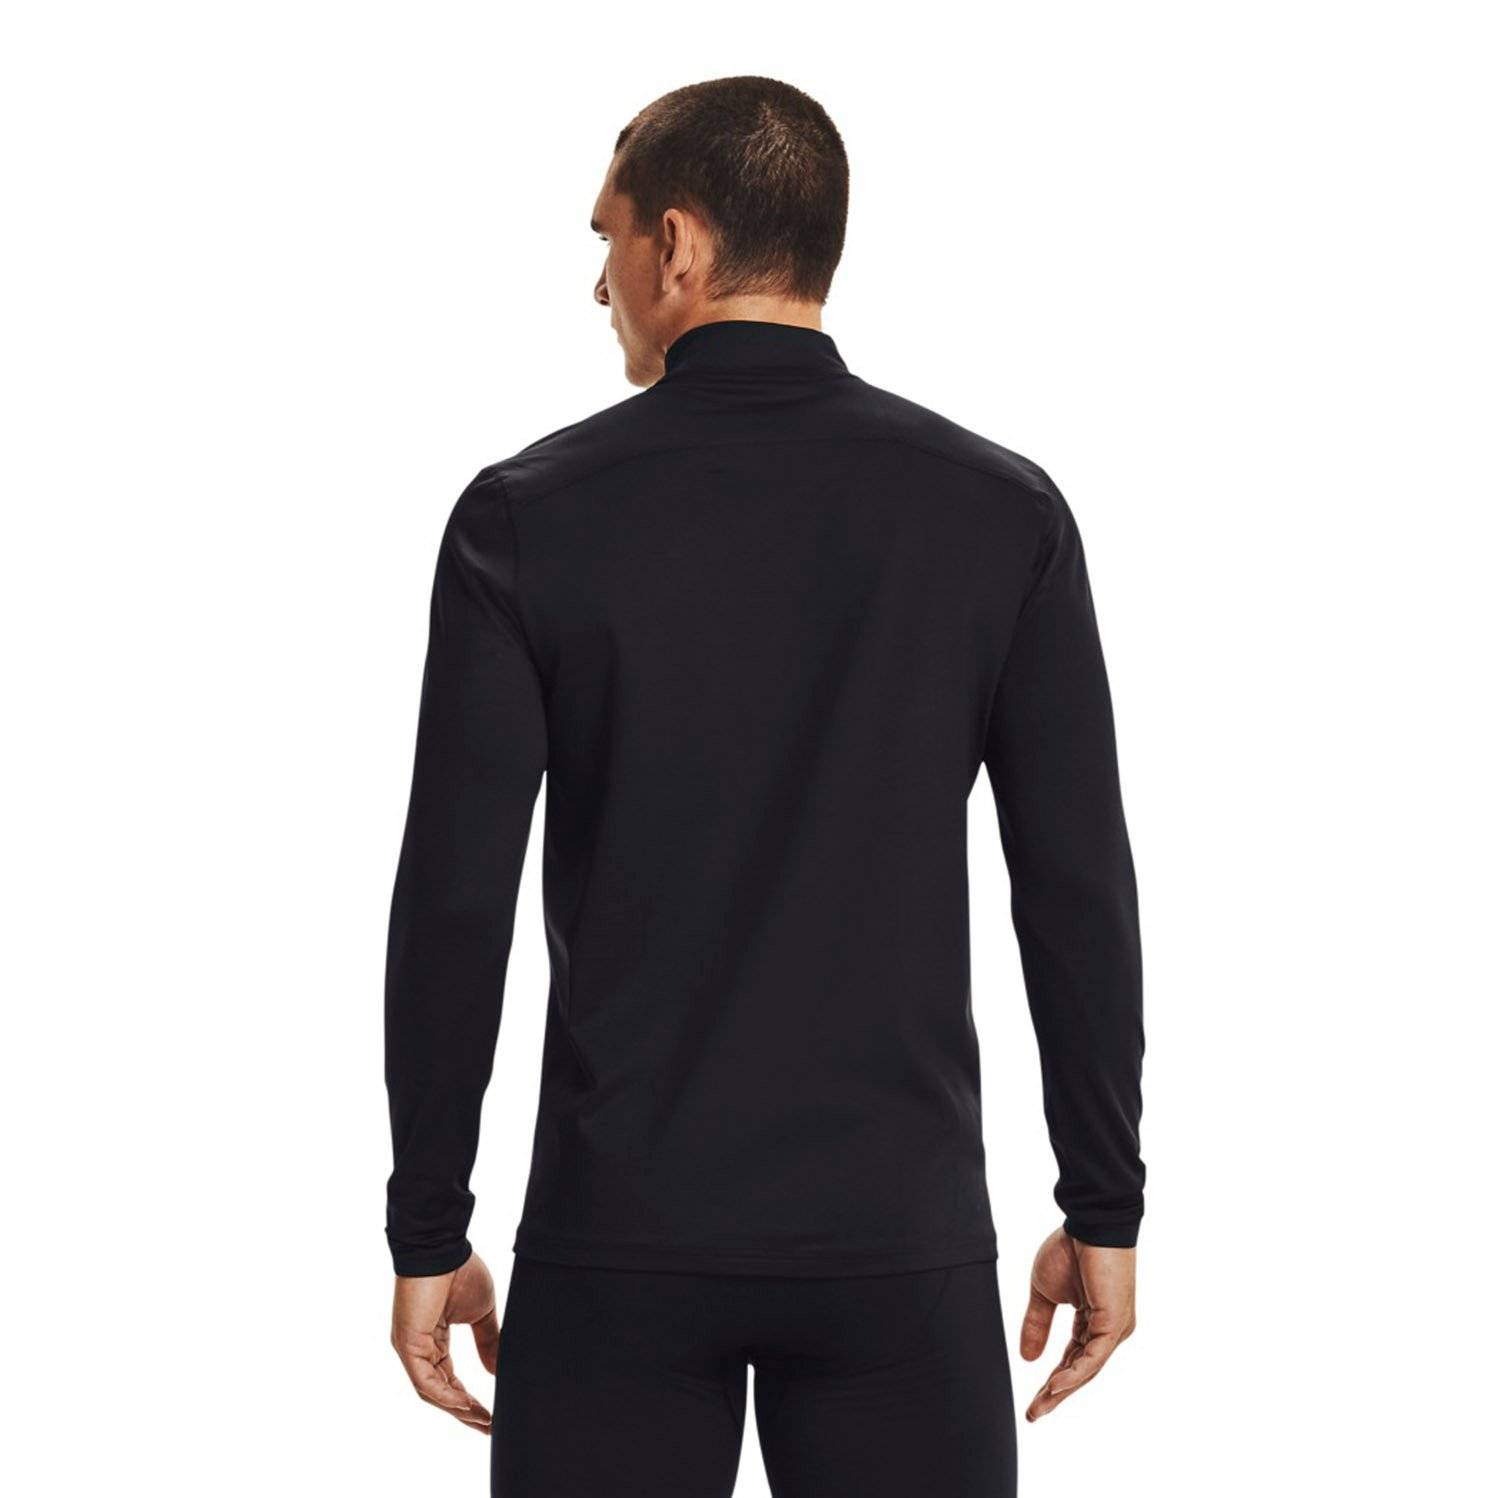 Under Armour ColdGear Infrared Tactical Quarter Zip Law